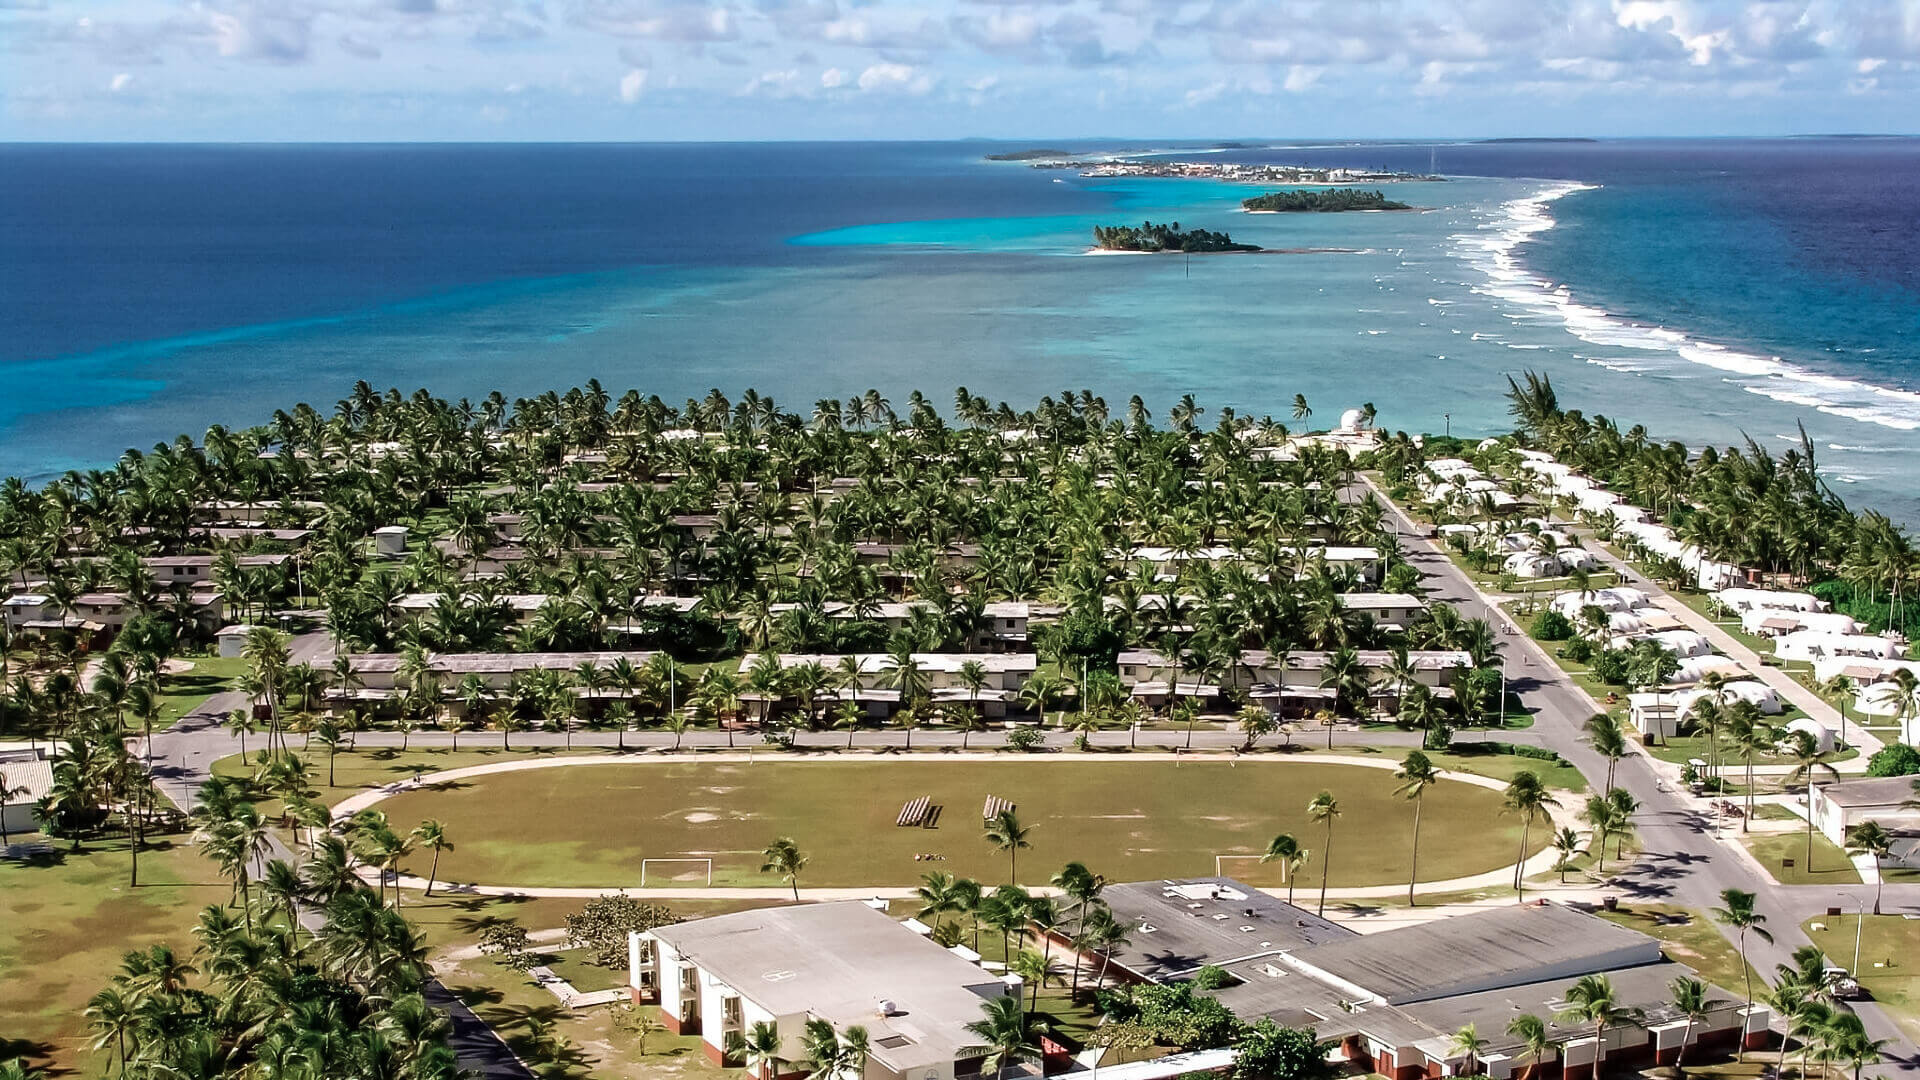 Internet and communications in Marshall Islands, Traveler's helper, Connectivity guide, Technology insights, 1920x1080 Full HD Desktop